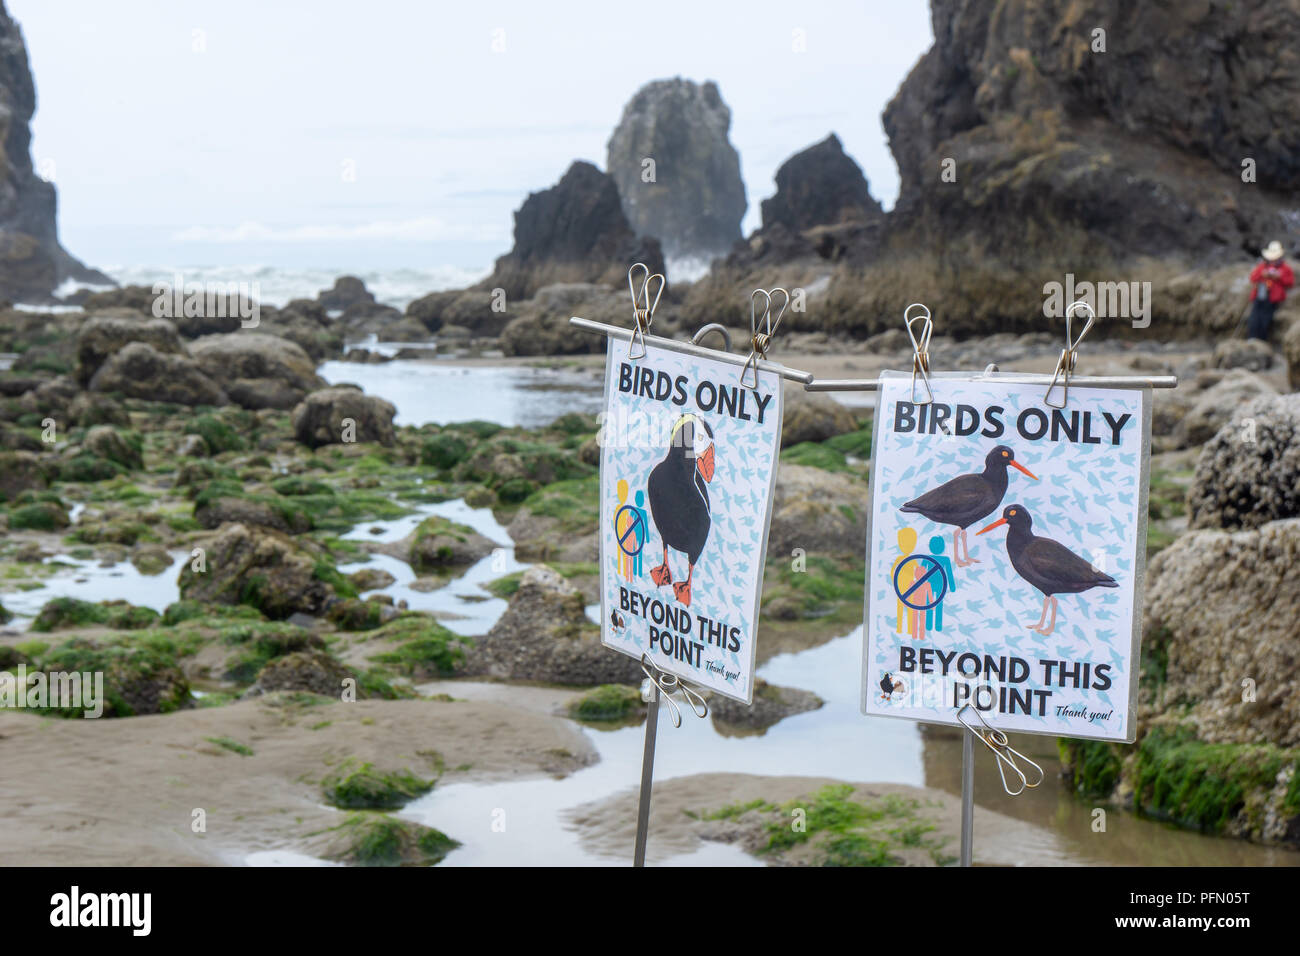 Haystack Rock Awareness Programm Birds Only Signs in order to protect wildlife, Cannon Beach, Oregon Coast, USA. Stock Photo